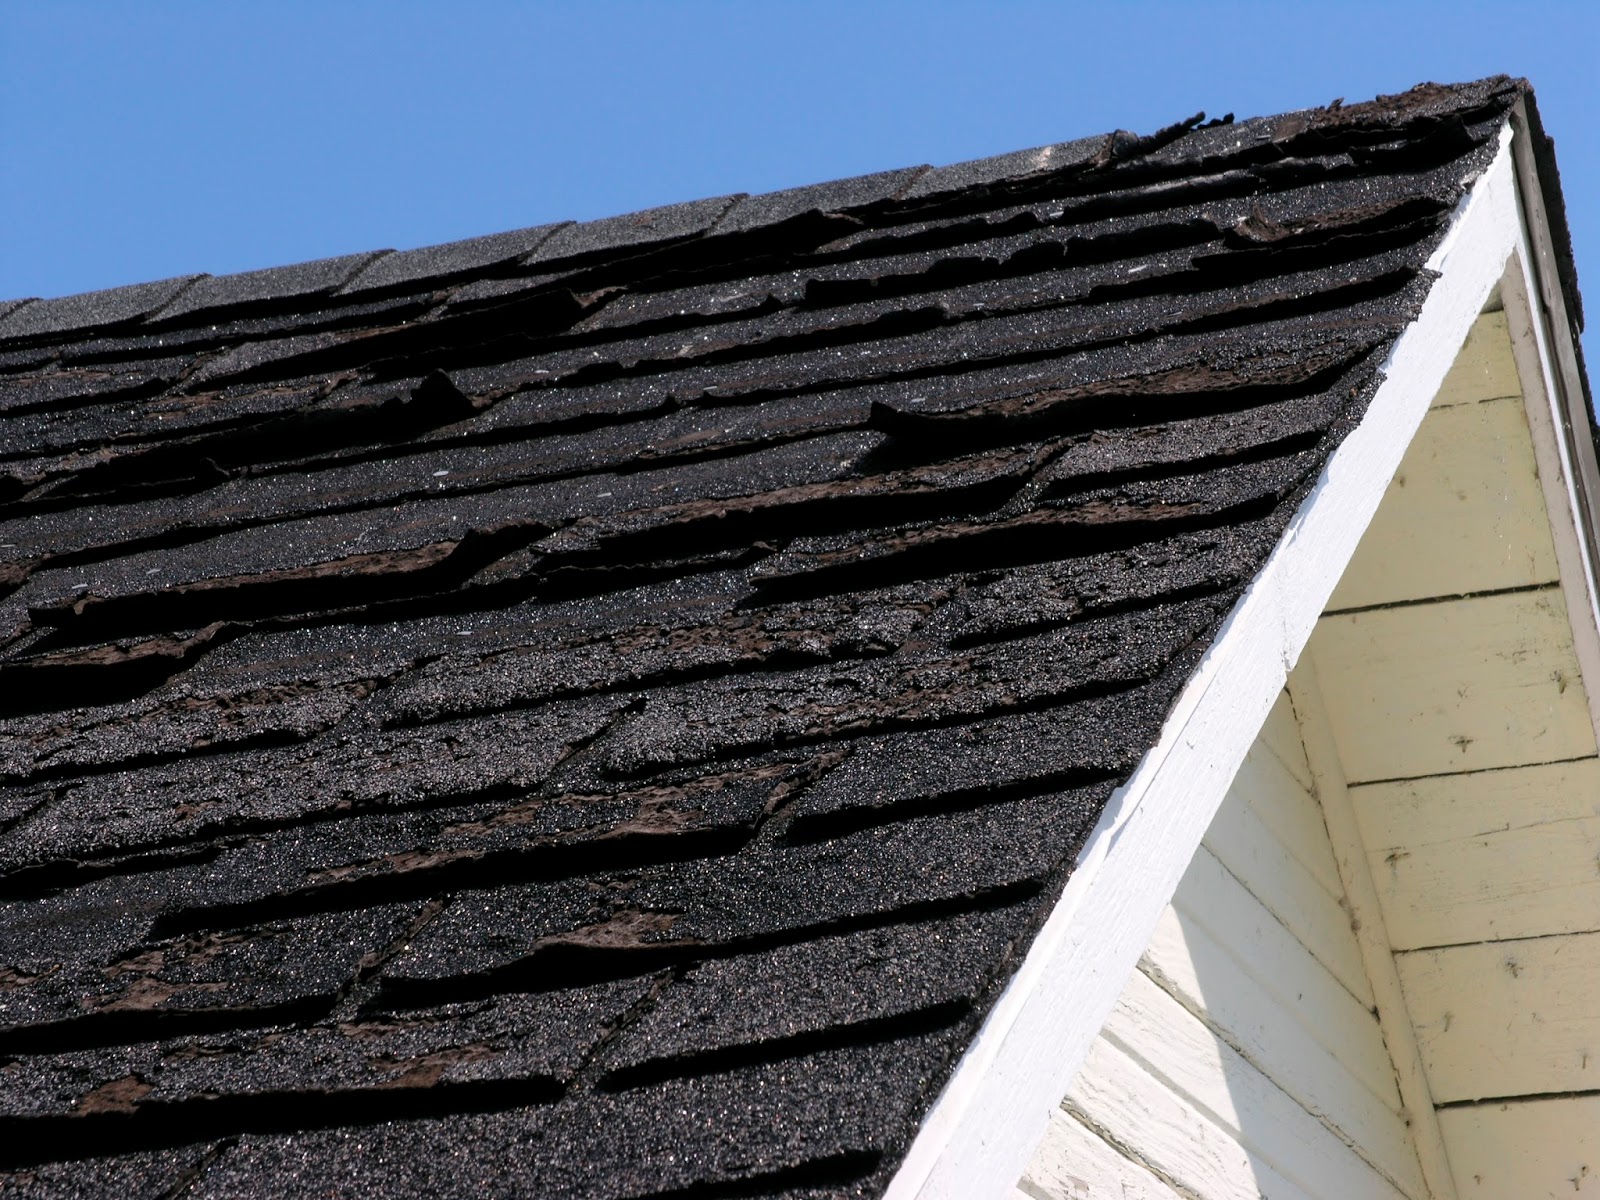 Ten Years After Installation, My 25-year Roof Is Failing